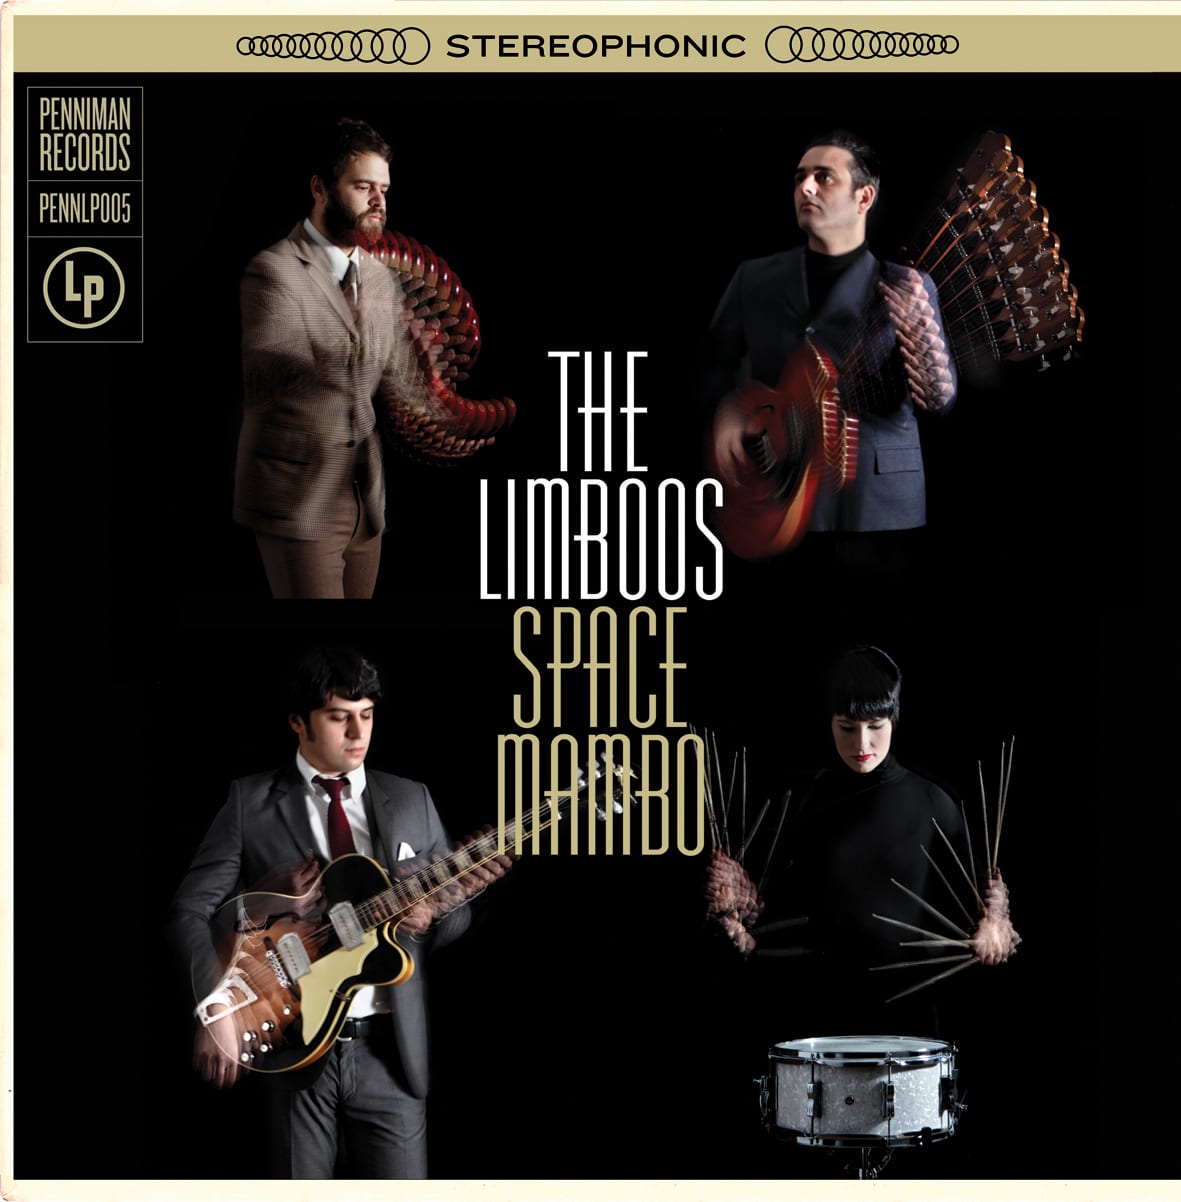 THE LIMBOOS – Space Mambo: mambo from out of space!